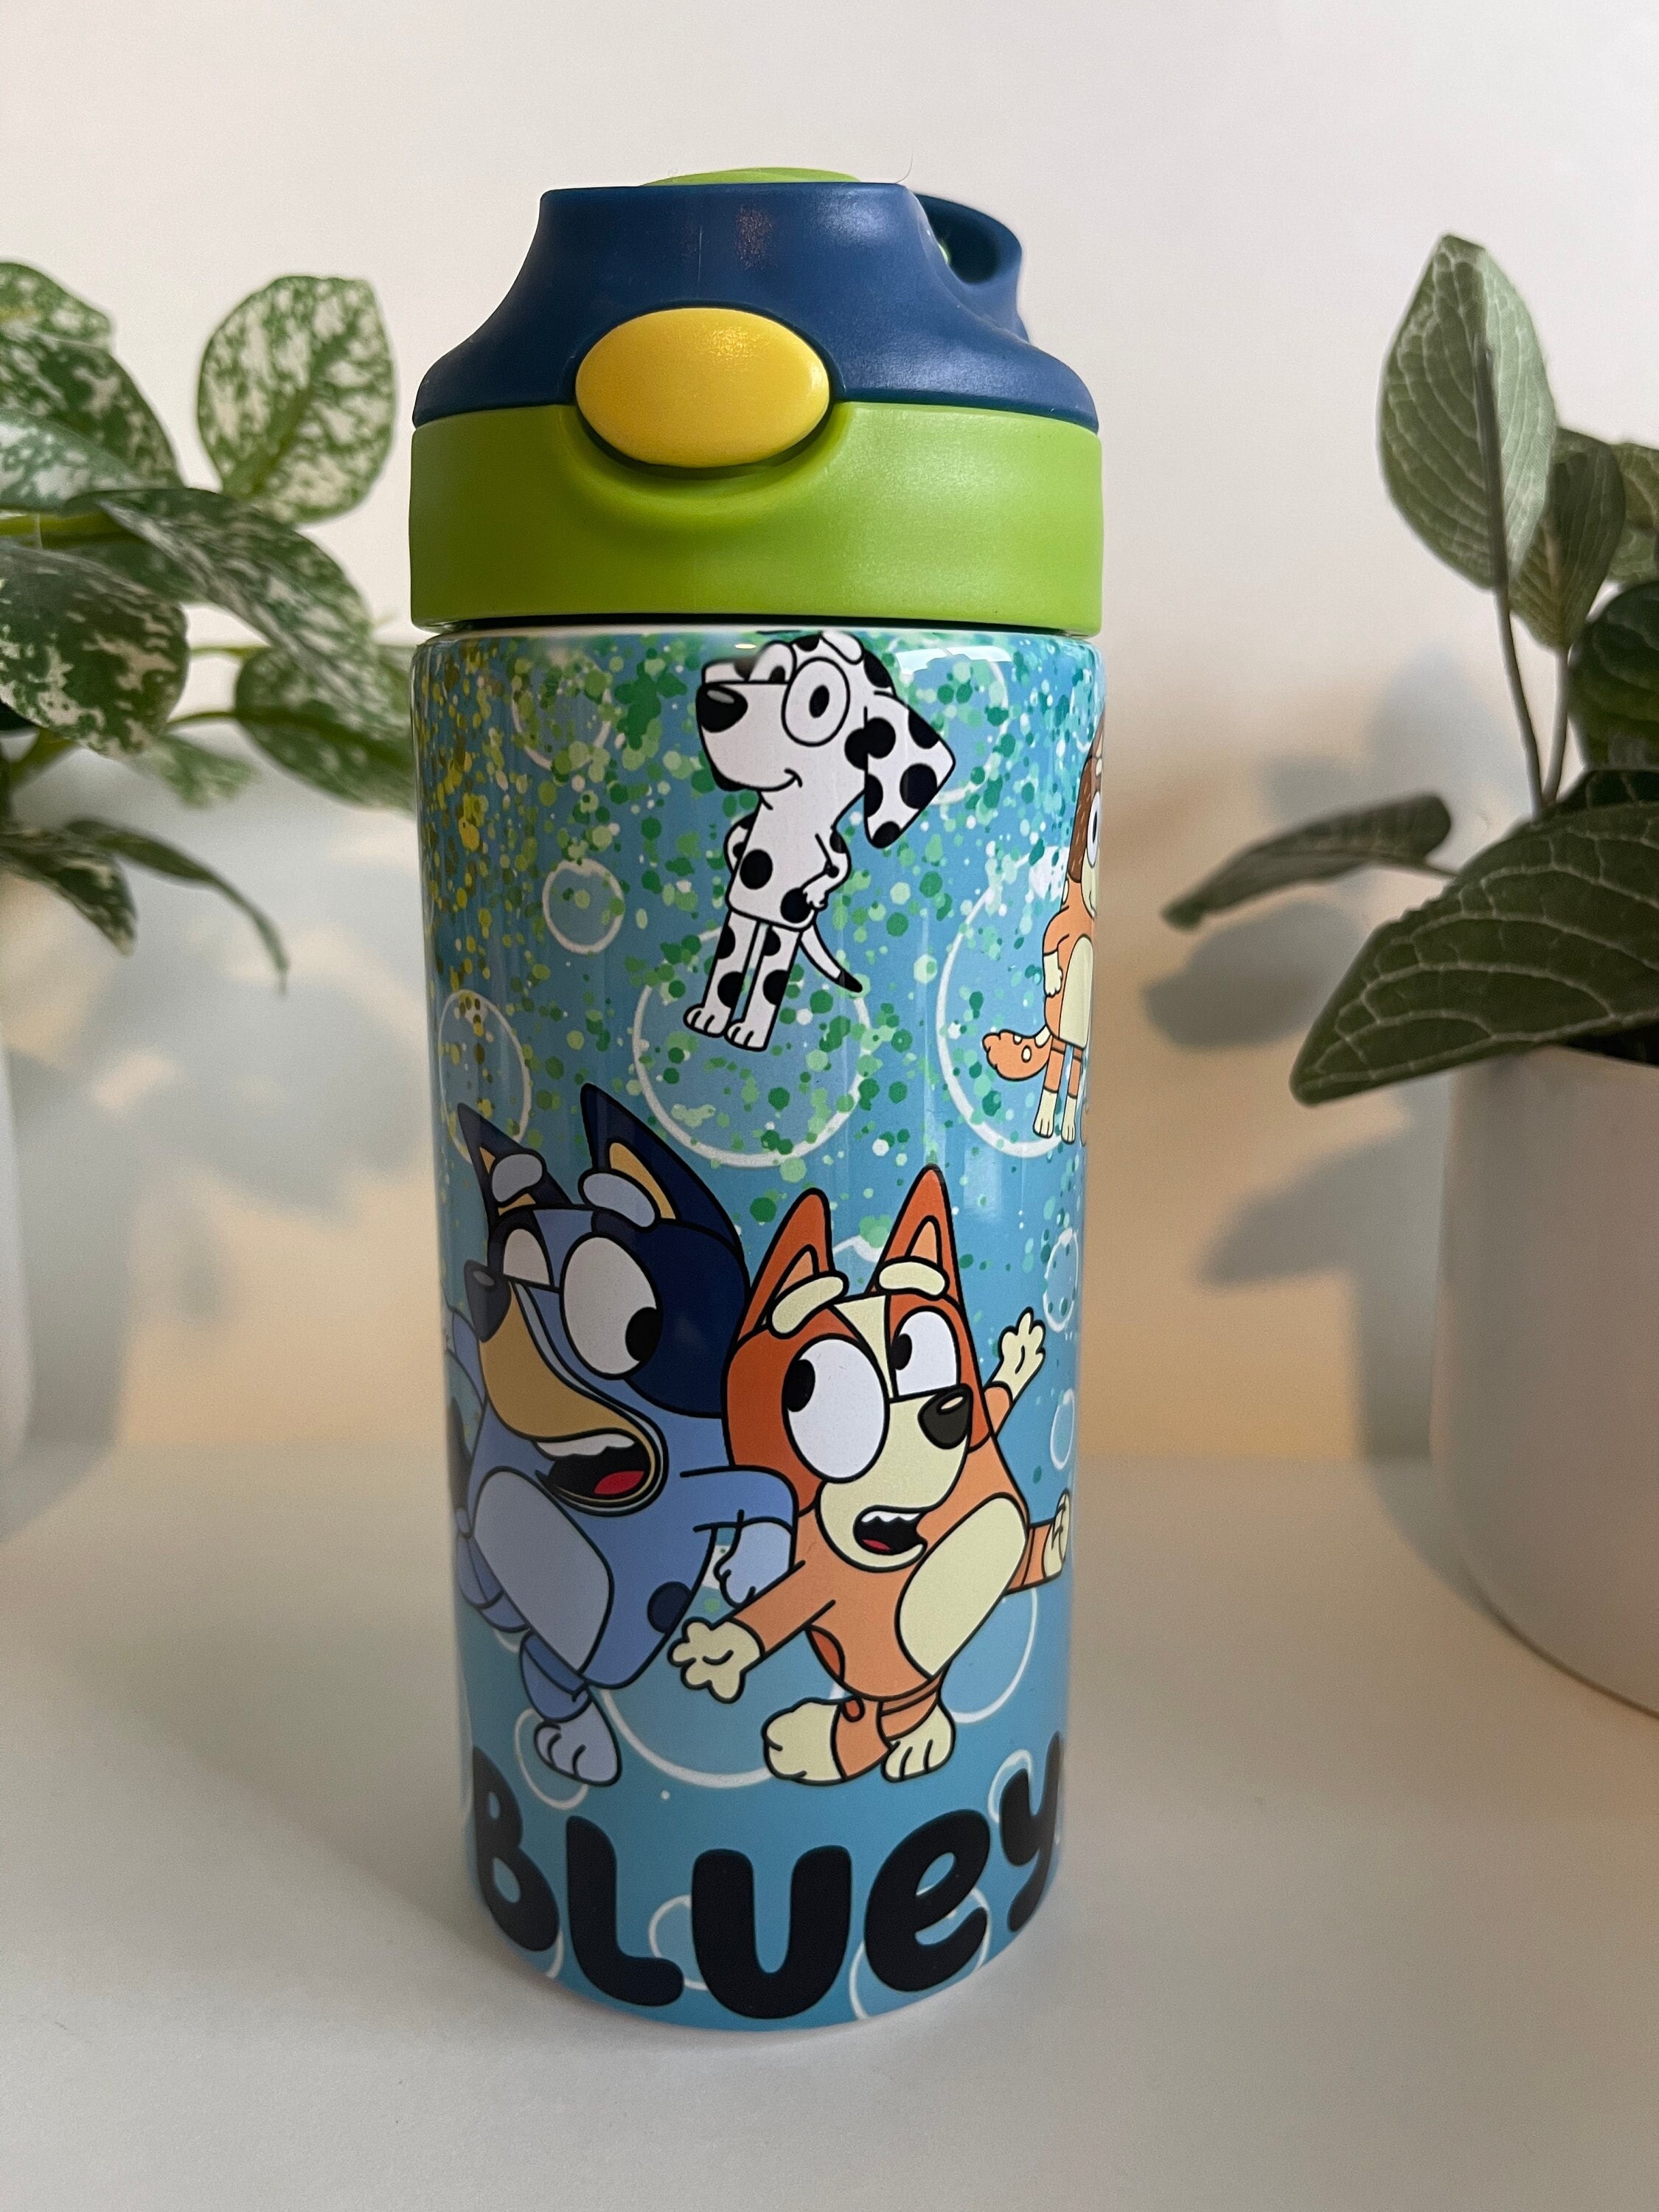 Say hello to this new 12 oz Bluey Sippy Cup and Tumbler Mix! 💙🥤 Perf